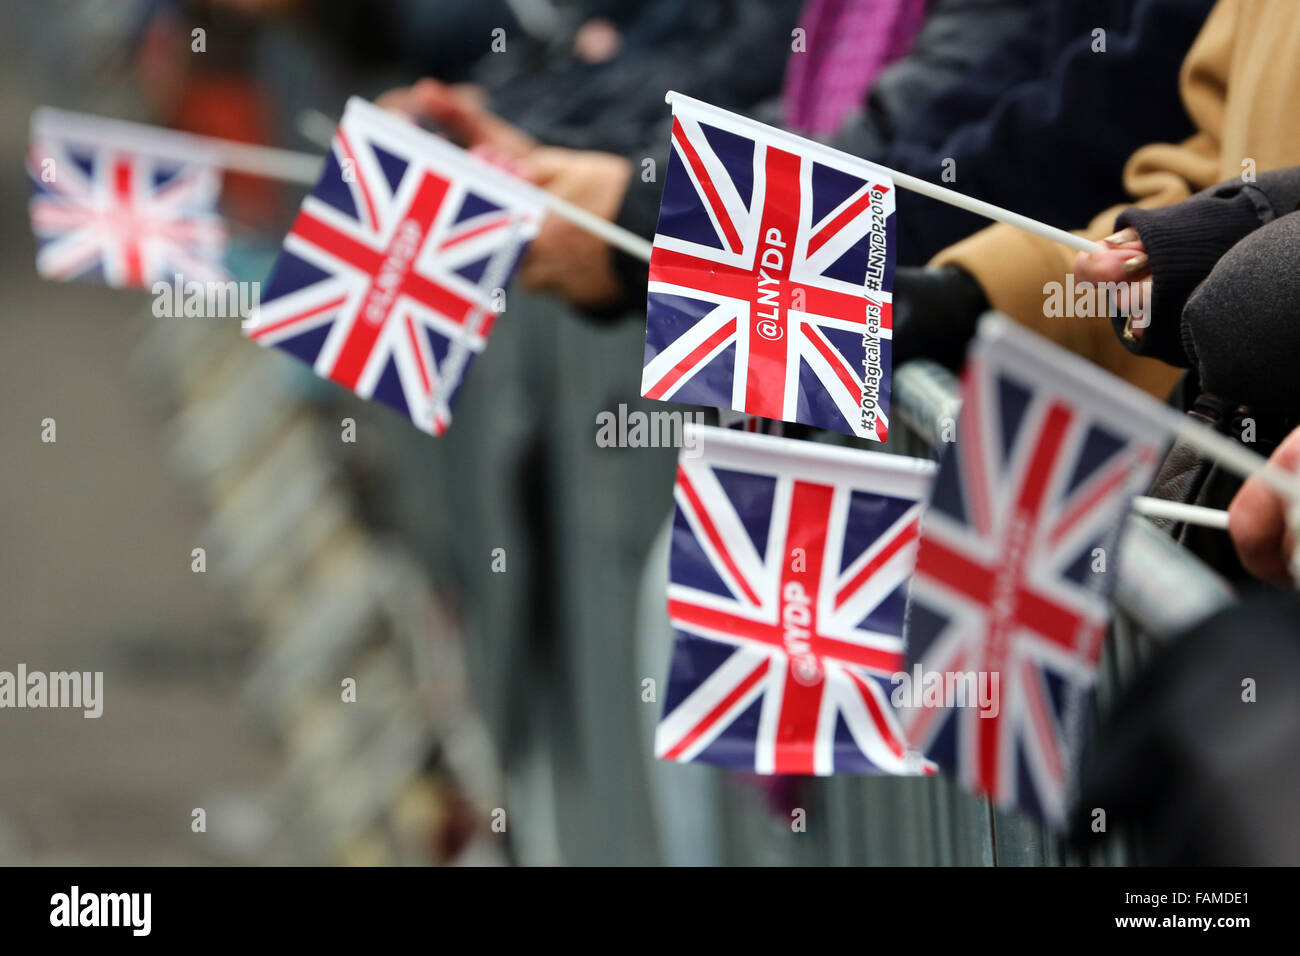 London, UK. 1st January 2016. LNYDP union jack flags waved by spectators at the London New Year's Day Parade, London, England which saw more than 8,500 performers from 20 countries worldwide taking part. With competitions between the London Boroughs and American marching bands and many, many horses it was certainly a great spectacle to start the year. Credit:  Paul Brown/Alamy Live News Stock Photo